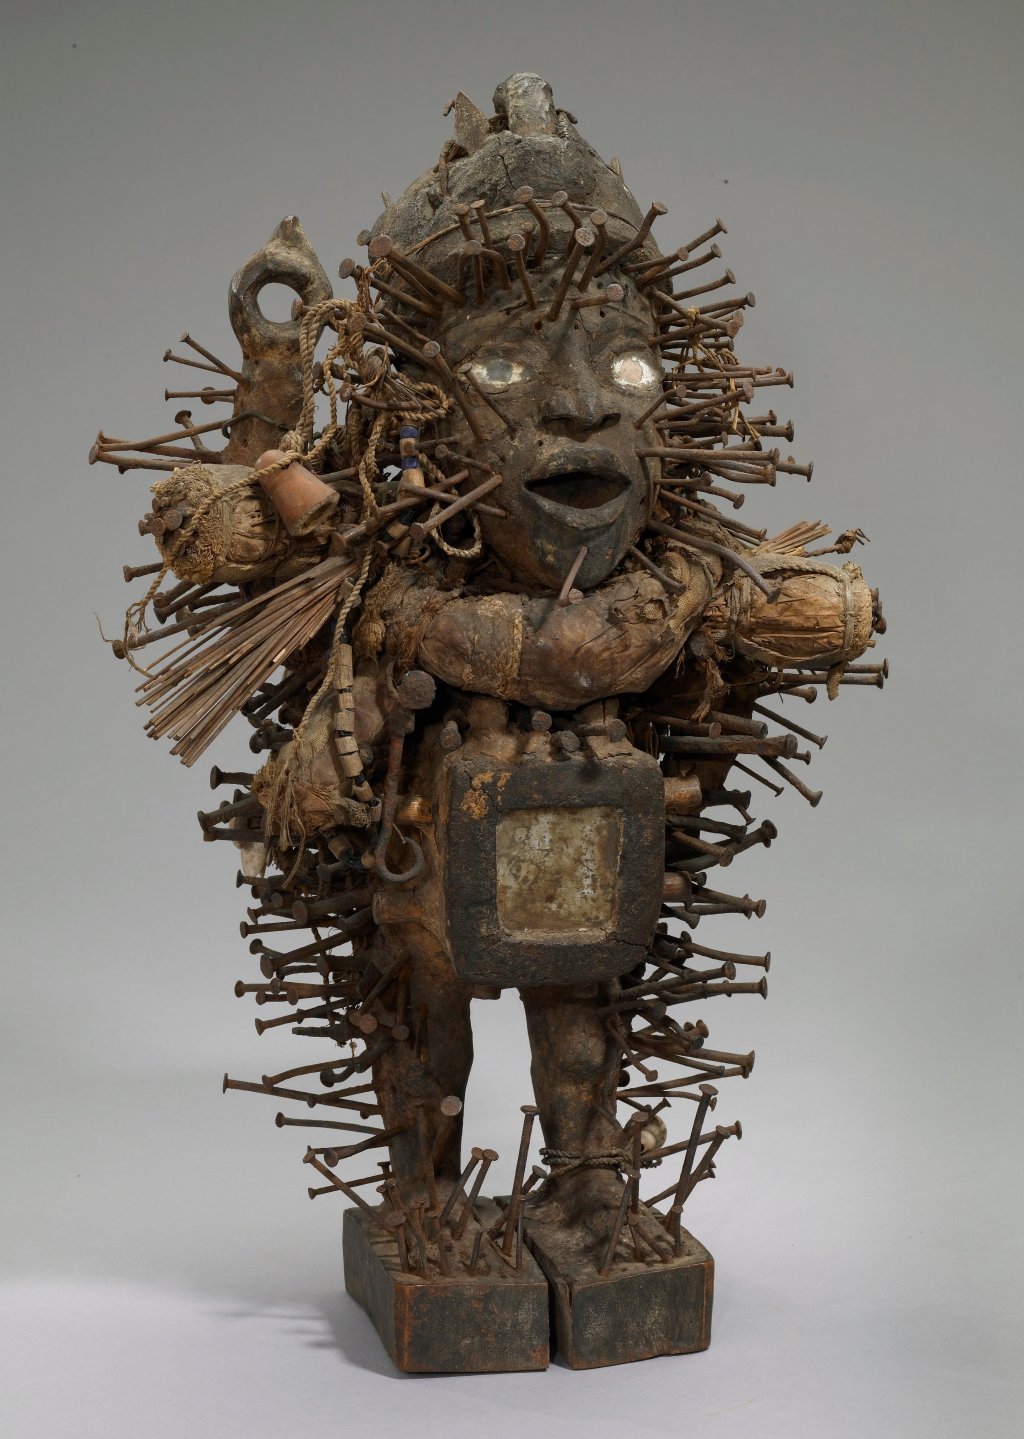 A power figurine from Kongo, Africa constructed with wood, natural fibers, glass, metal, and other materials.